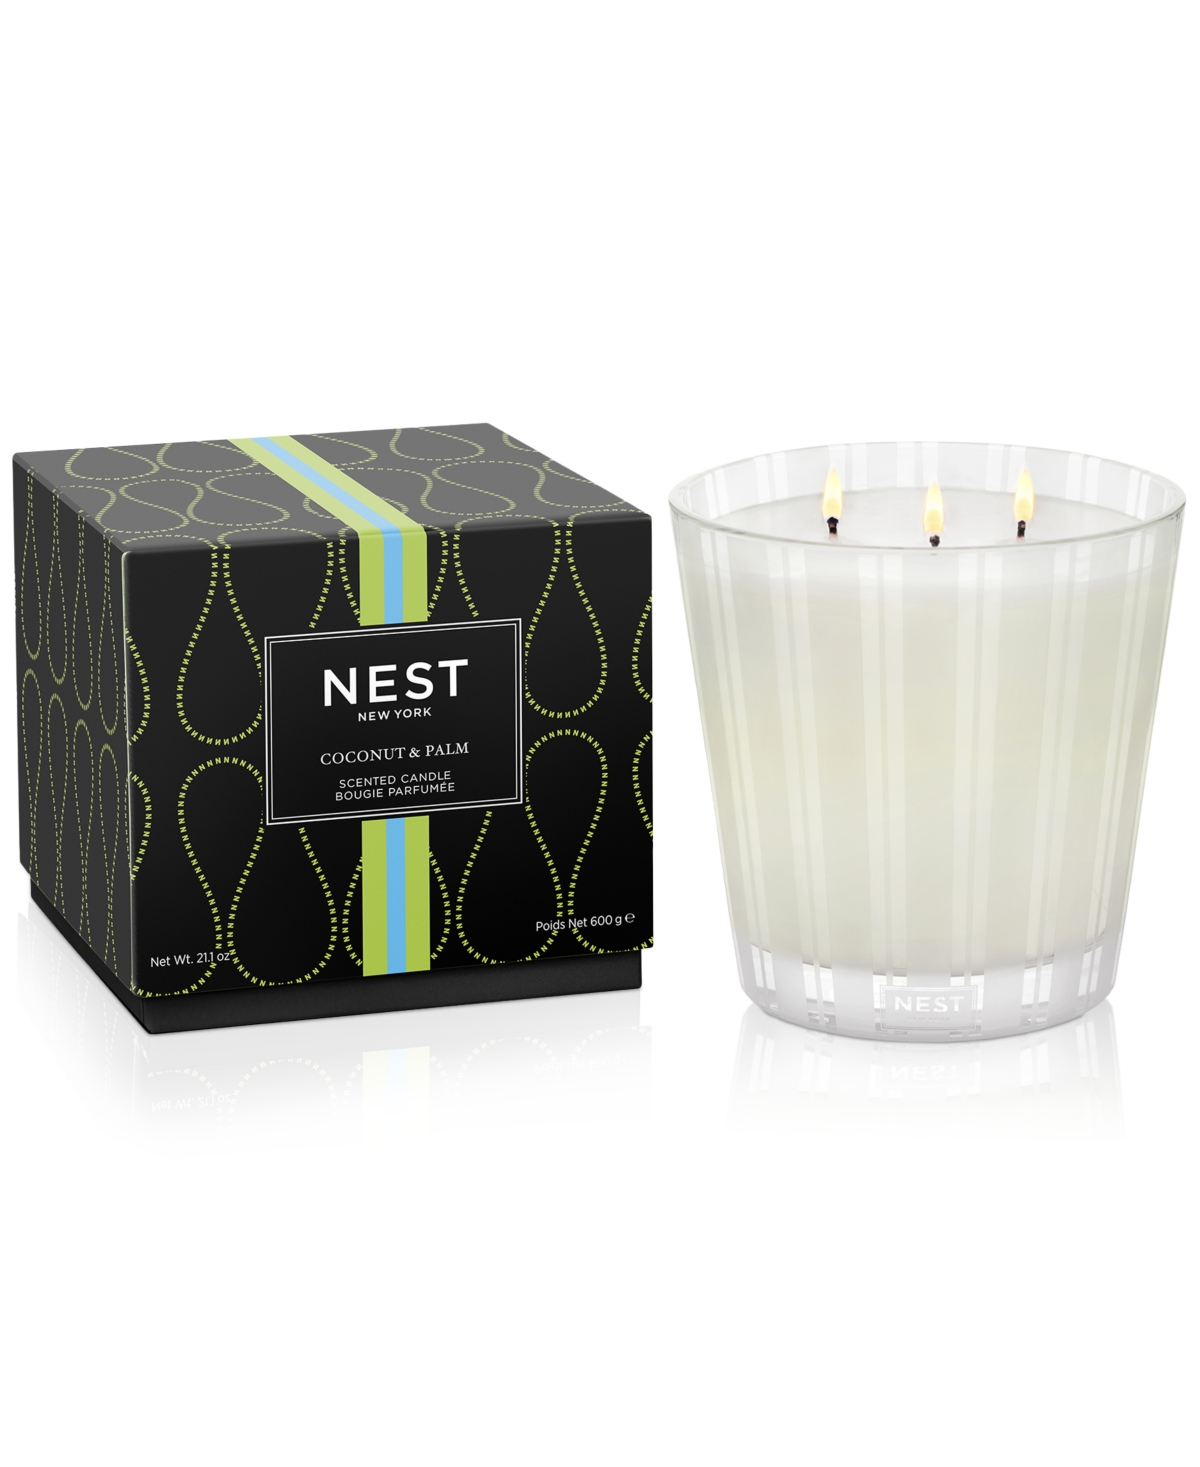 Coconut & Palm 3-Wick Candle, 21.1 oz.